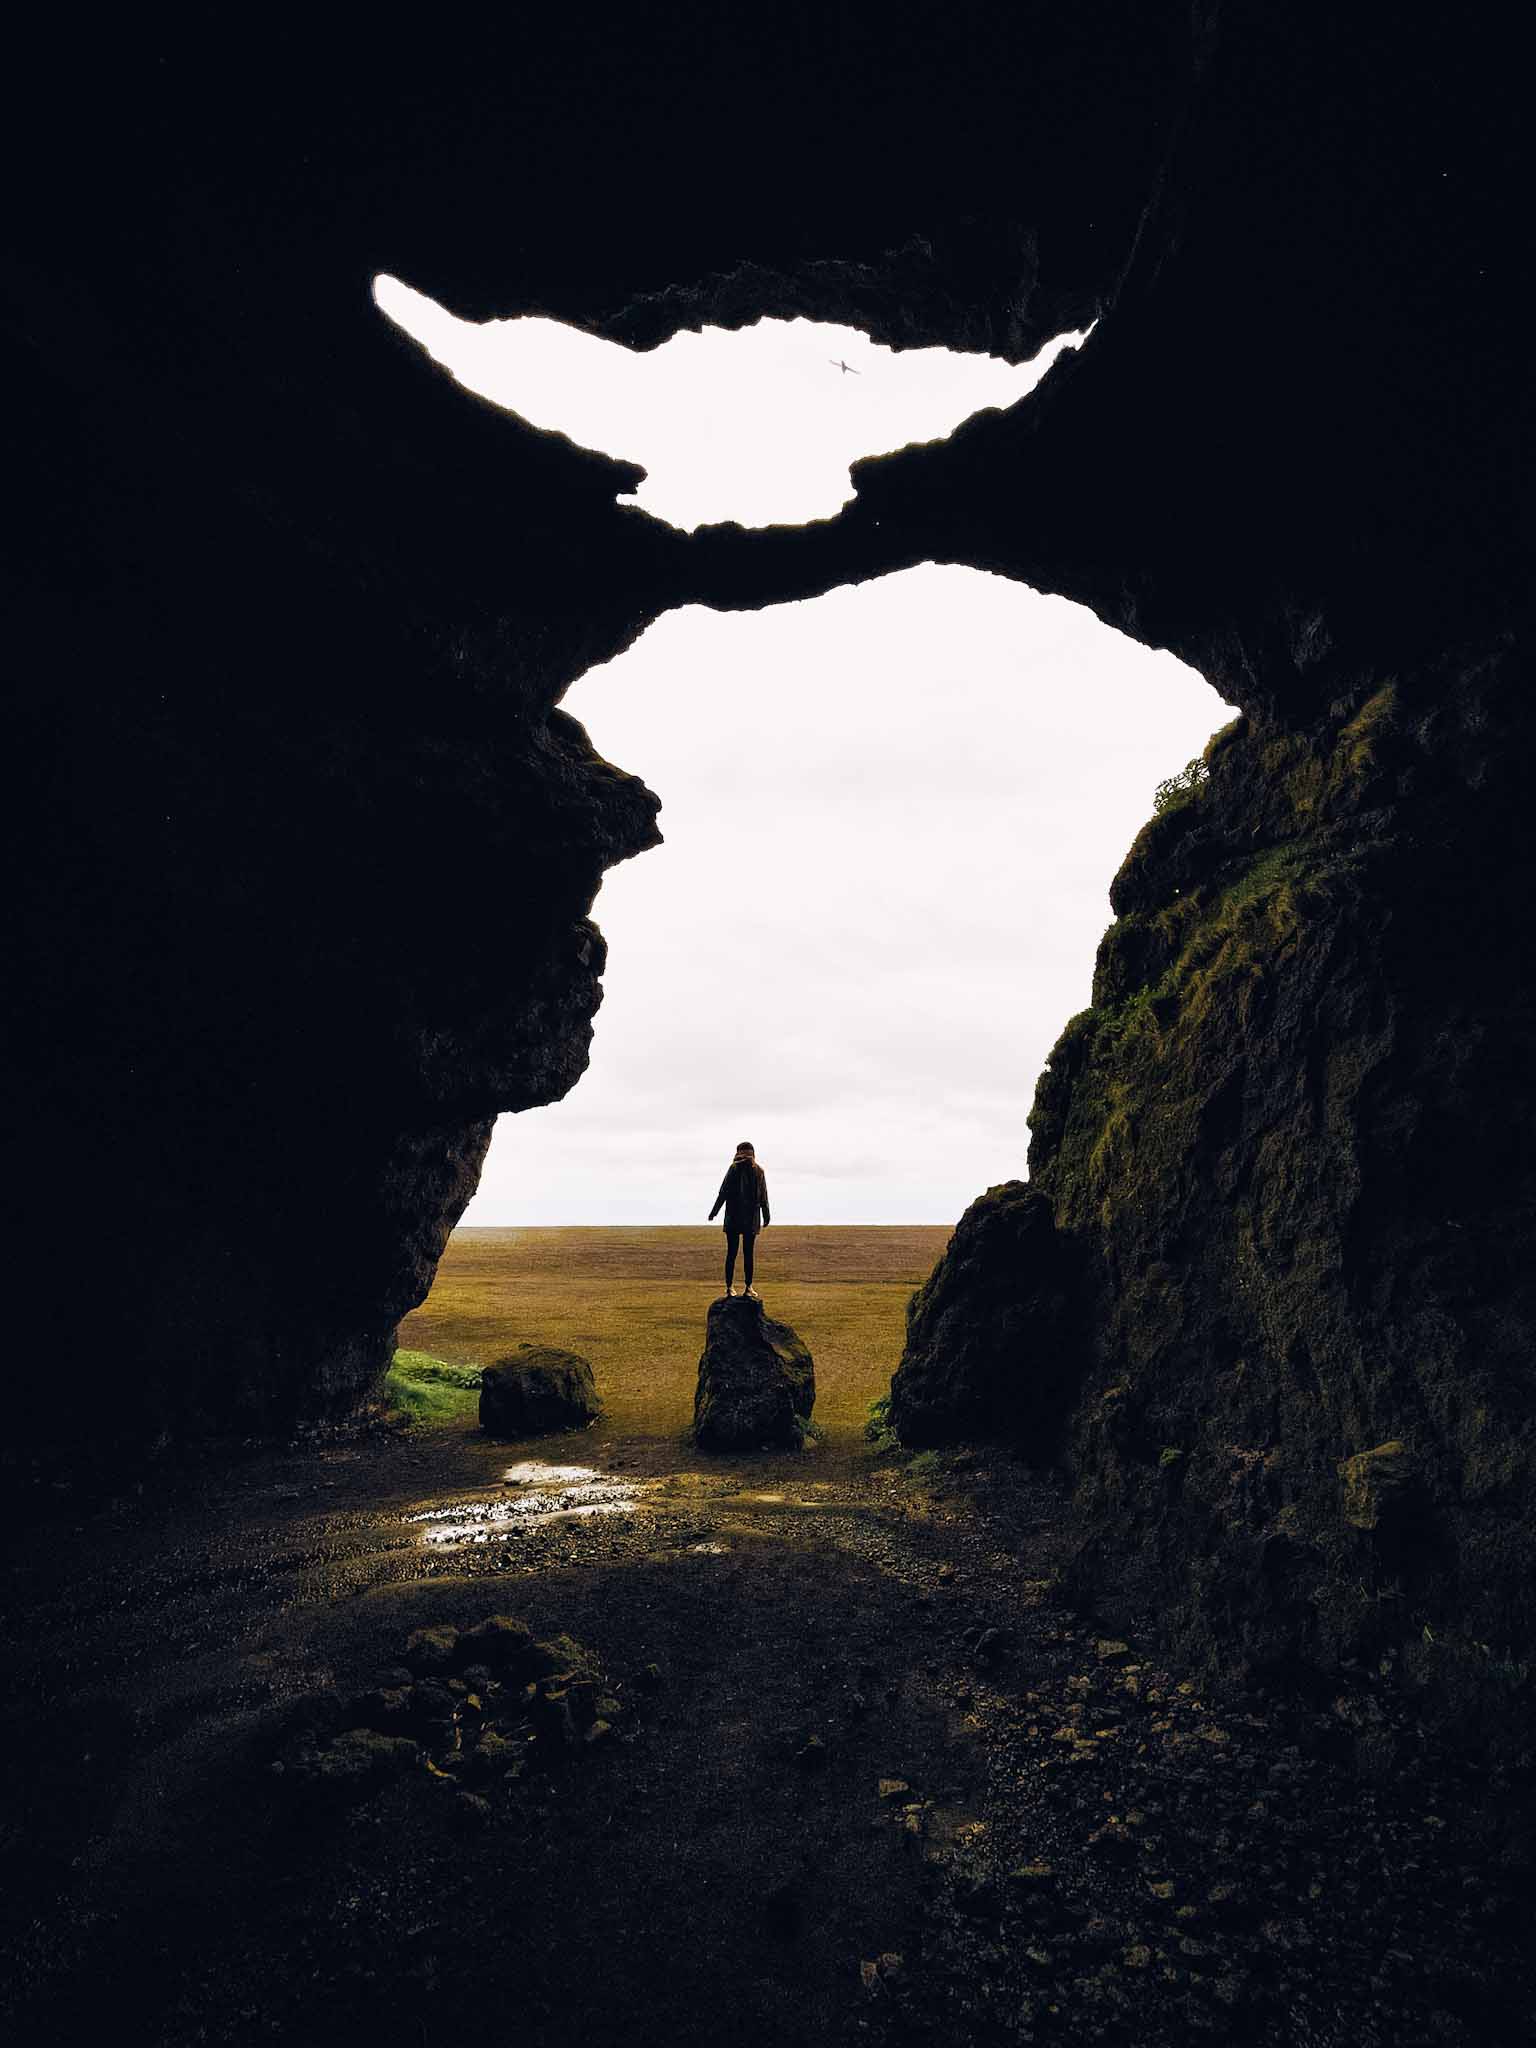 Unique rock formations in Iceland - the Yoda cave